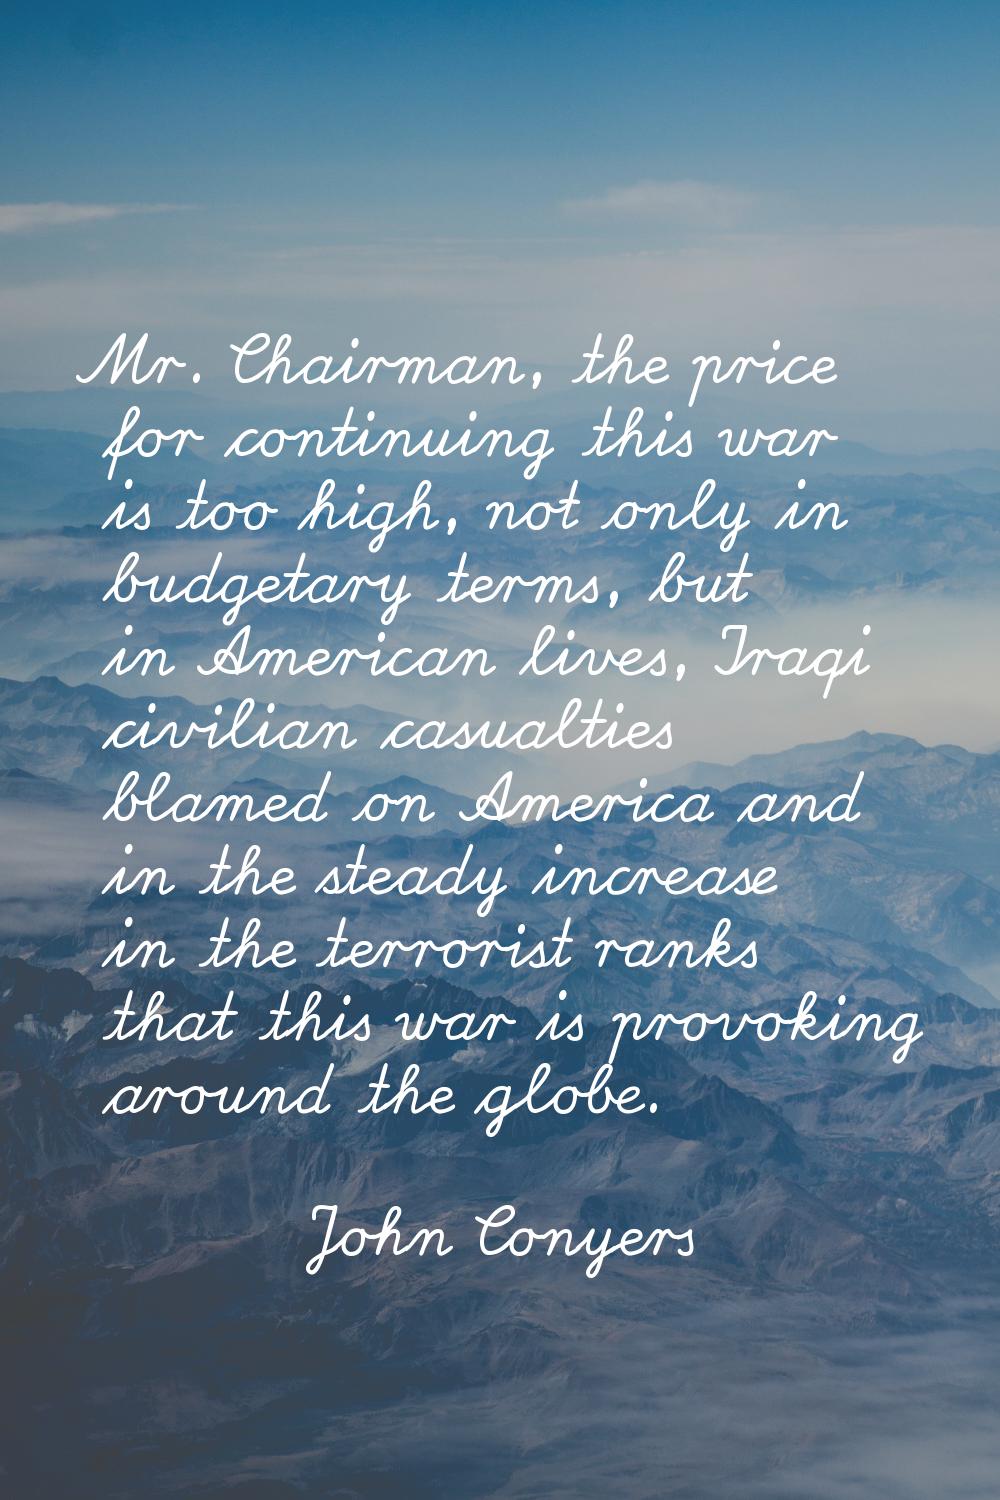 Mr. Chairman, the price for continuing this war is too high, not only in budgetary terms, but in Am